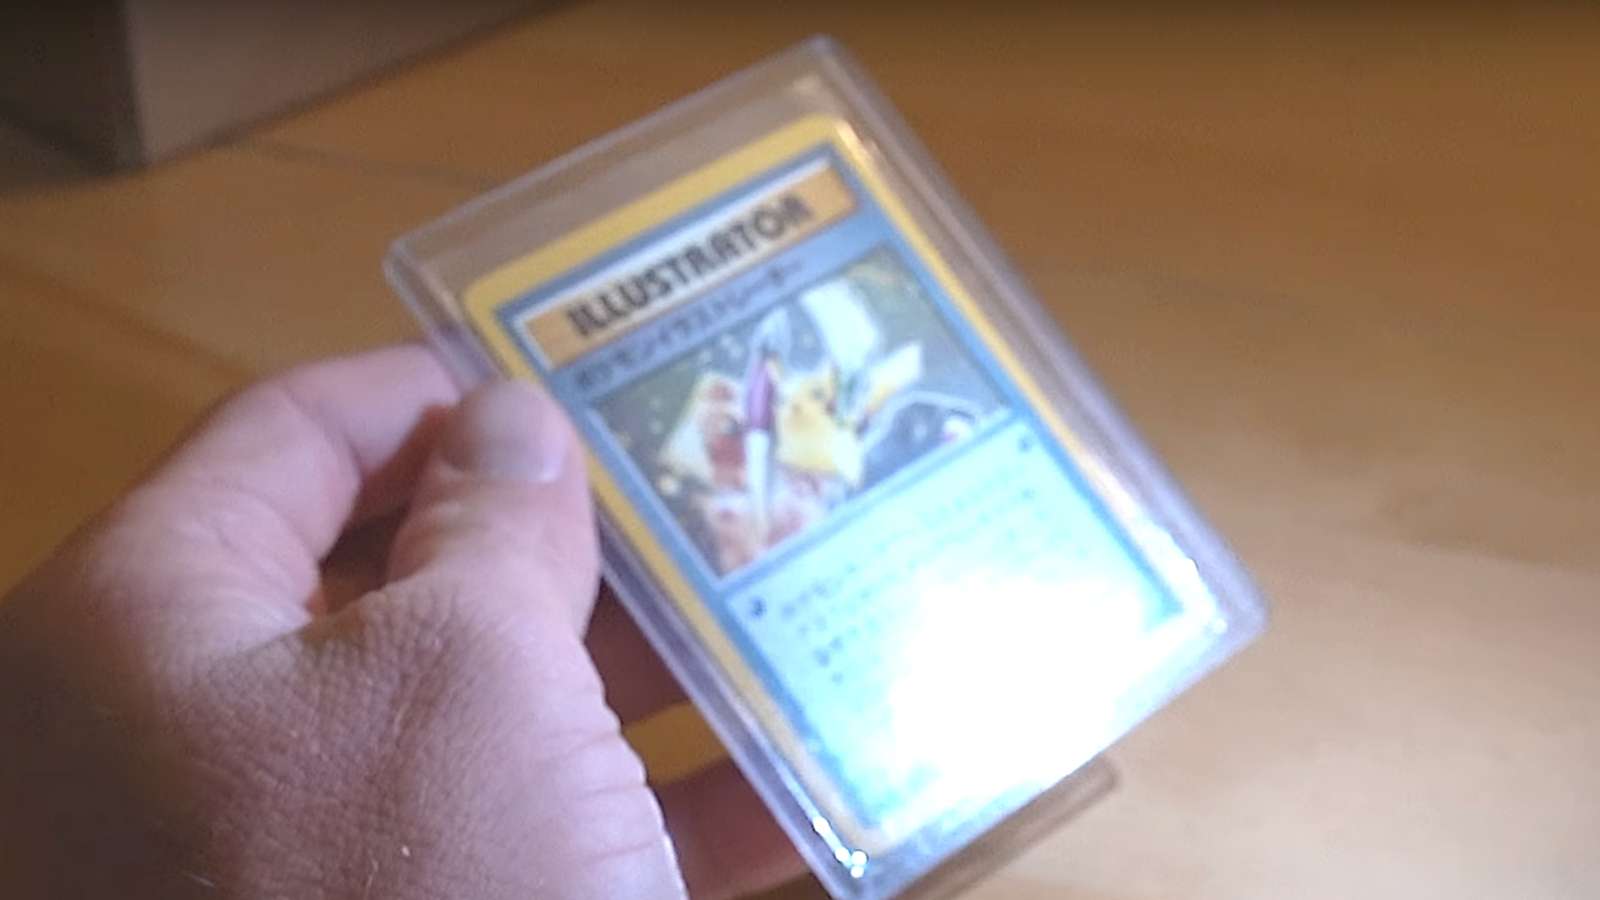 The rarest Pokemon TCG card being held by Logan Paul